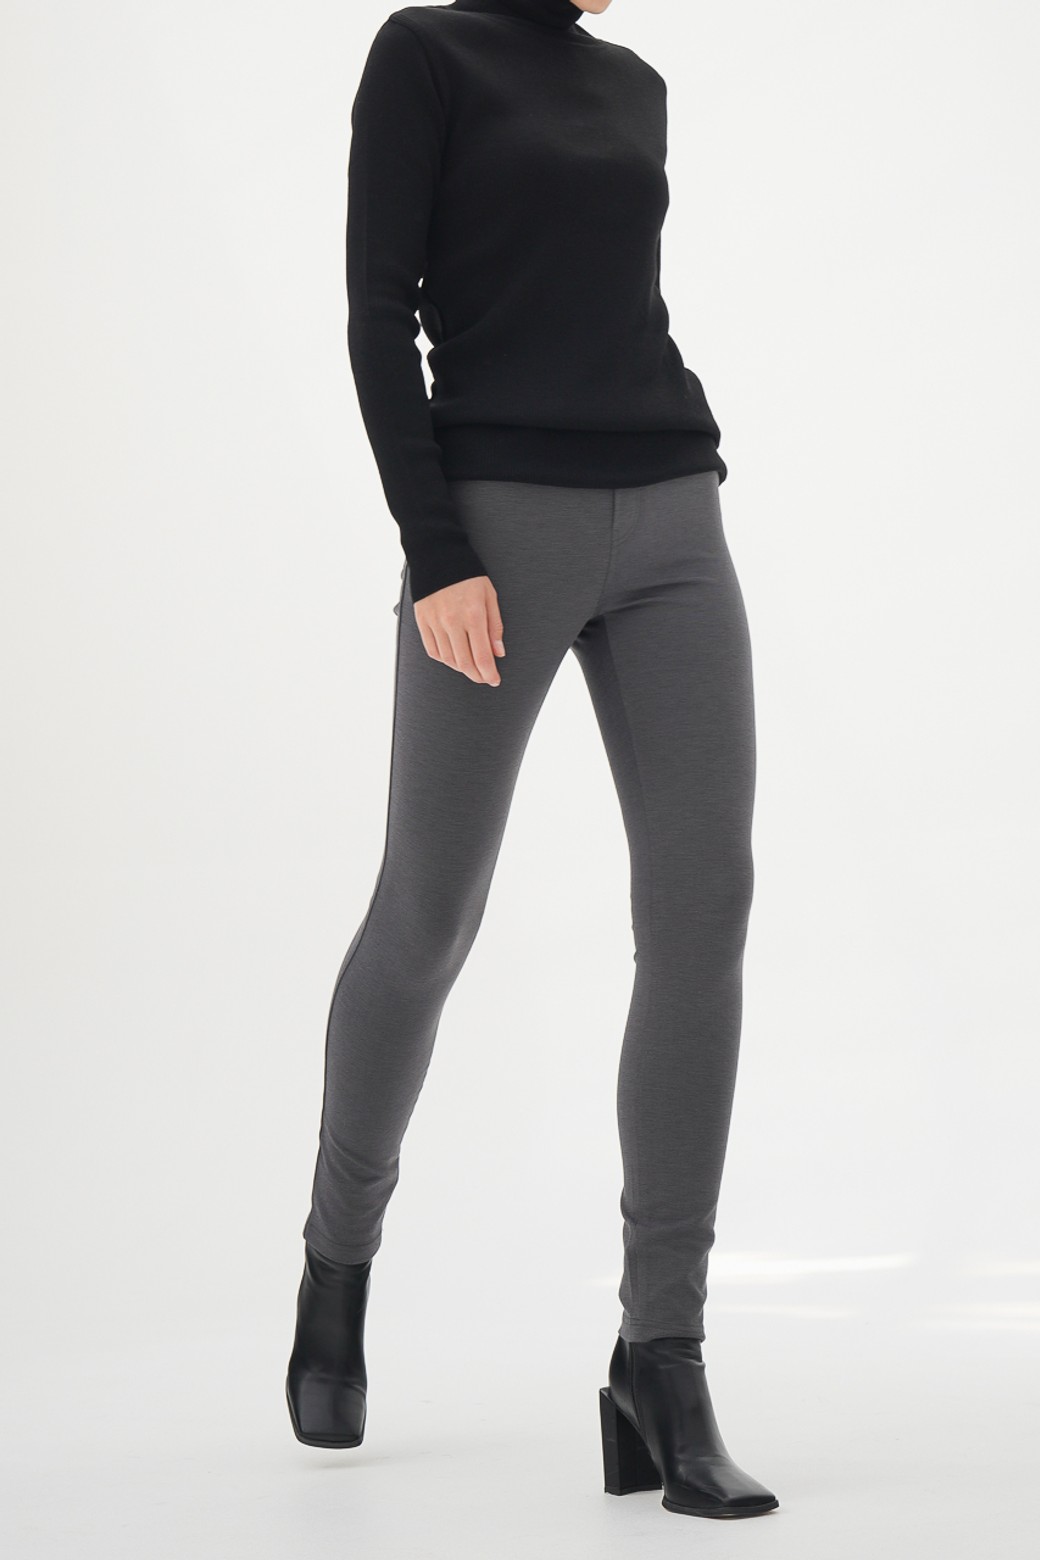 HEATTECH Extra Stretch Leggings Trousers